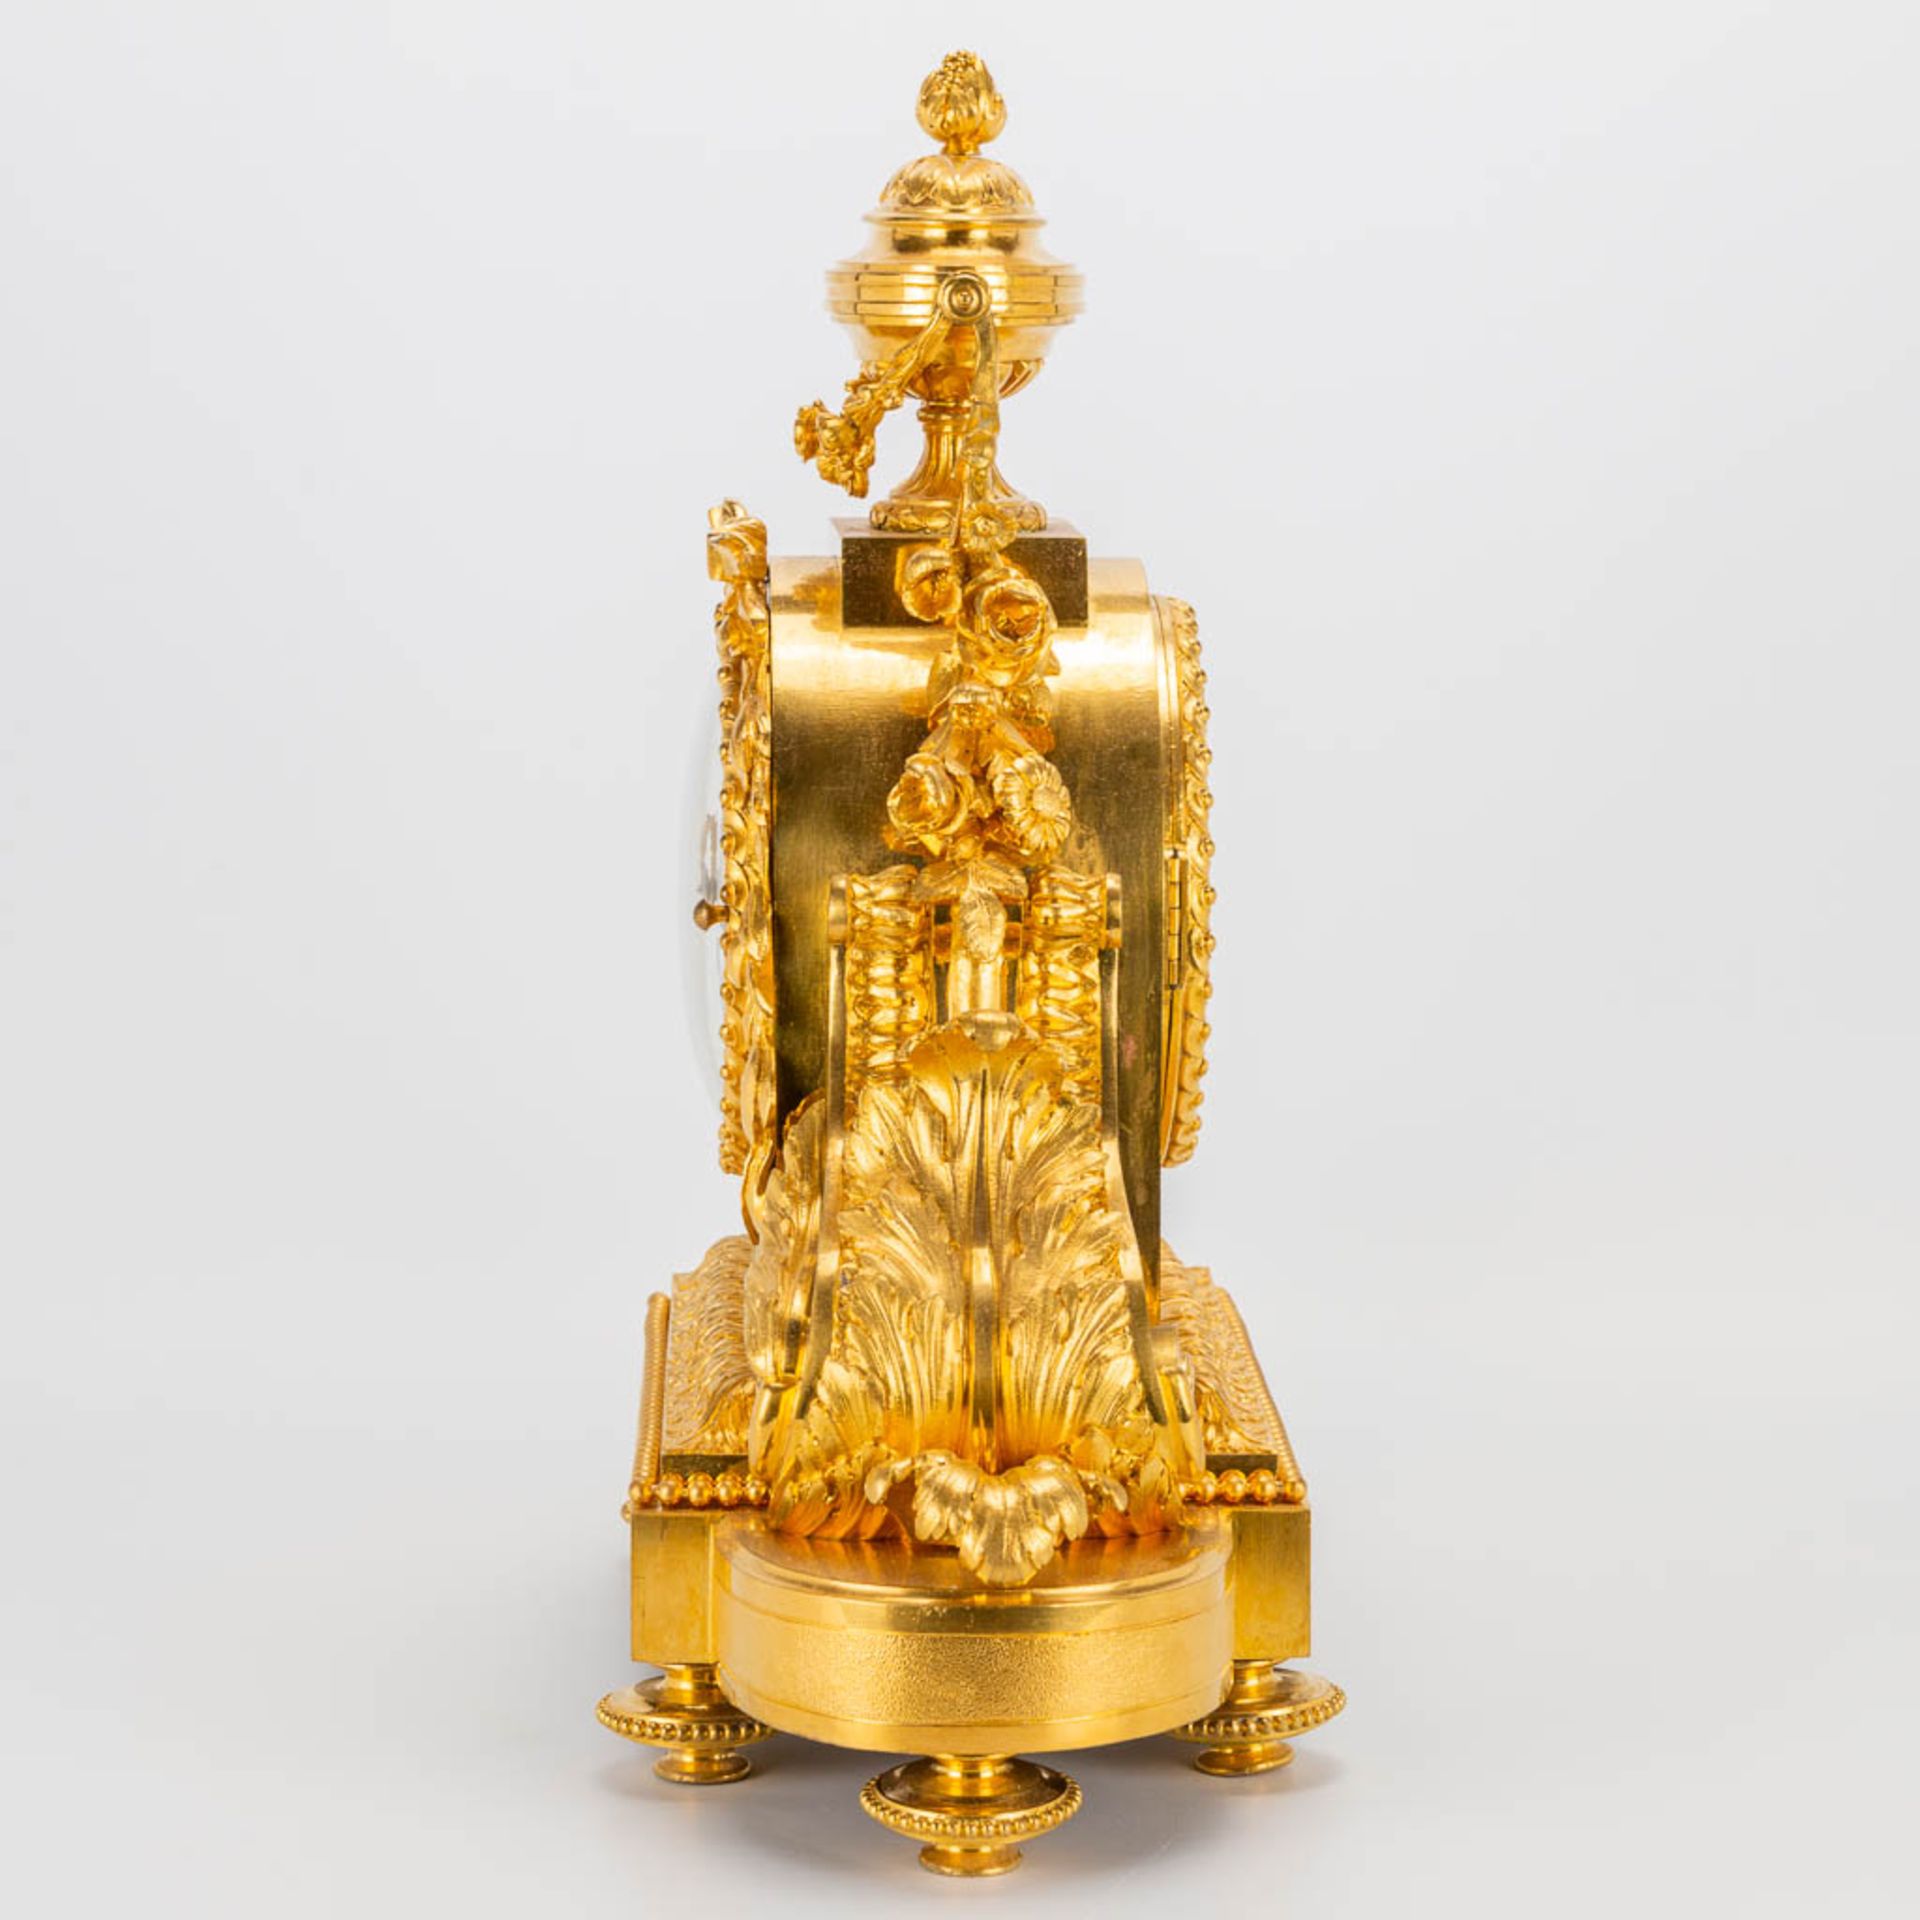 A bronze ormolu table clock made in Louis XVI style. 19th century. (15 x 41 x 42 cm) - Image 6 of 20